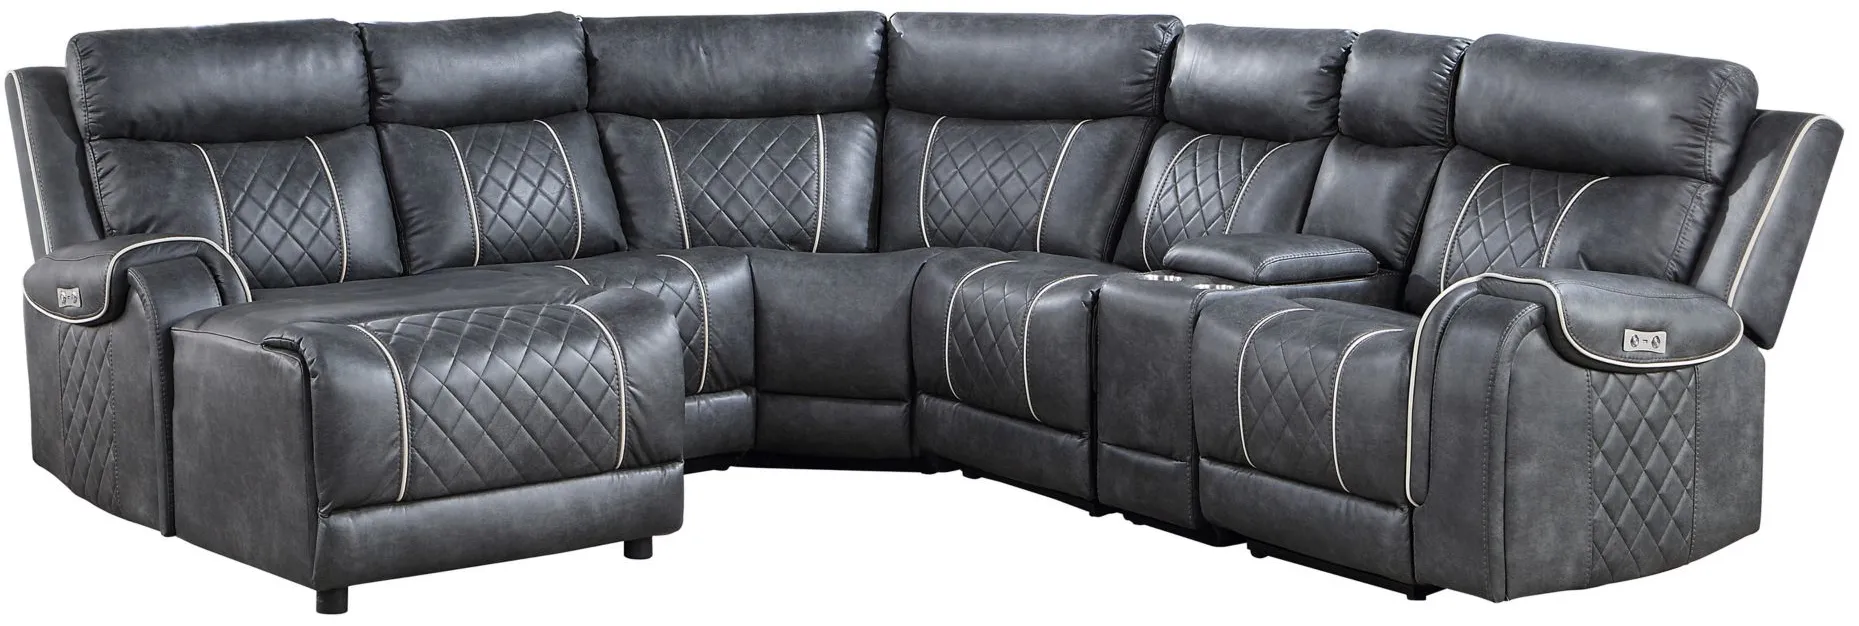 Dawson 6-pc Power Reclining Sectional w/ Left Chaise in Gray by Homelegance